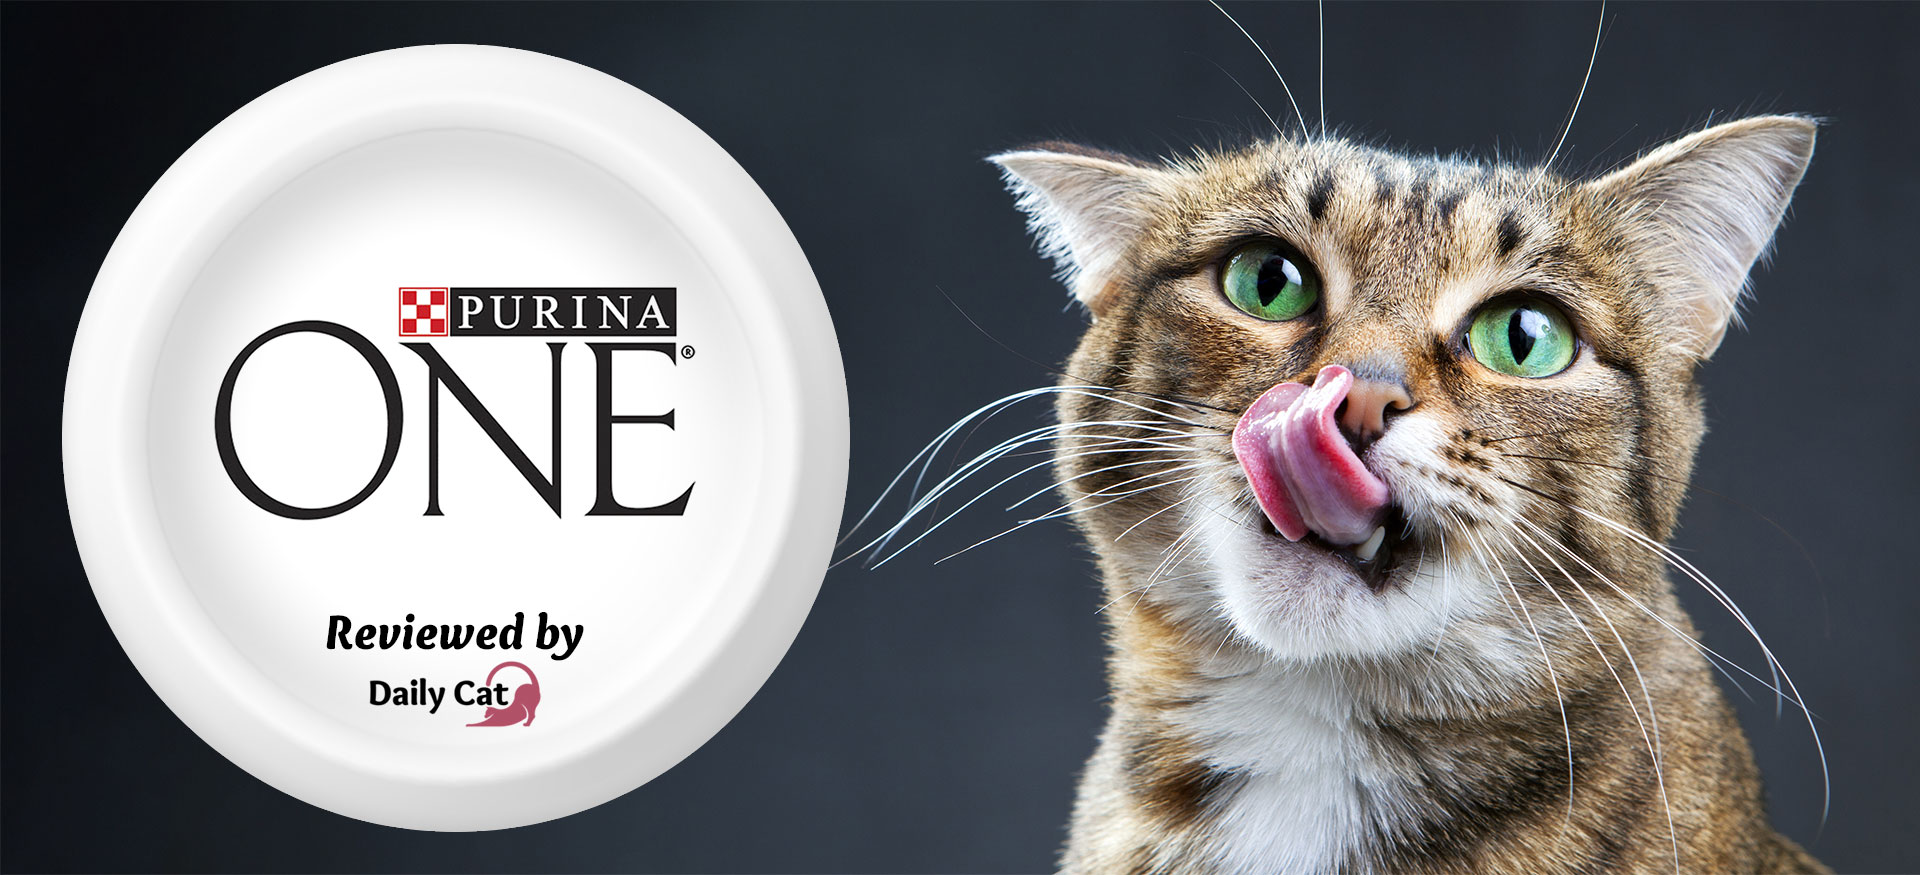 dailycat brand review purina one